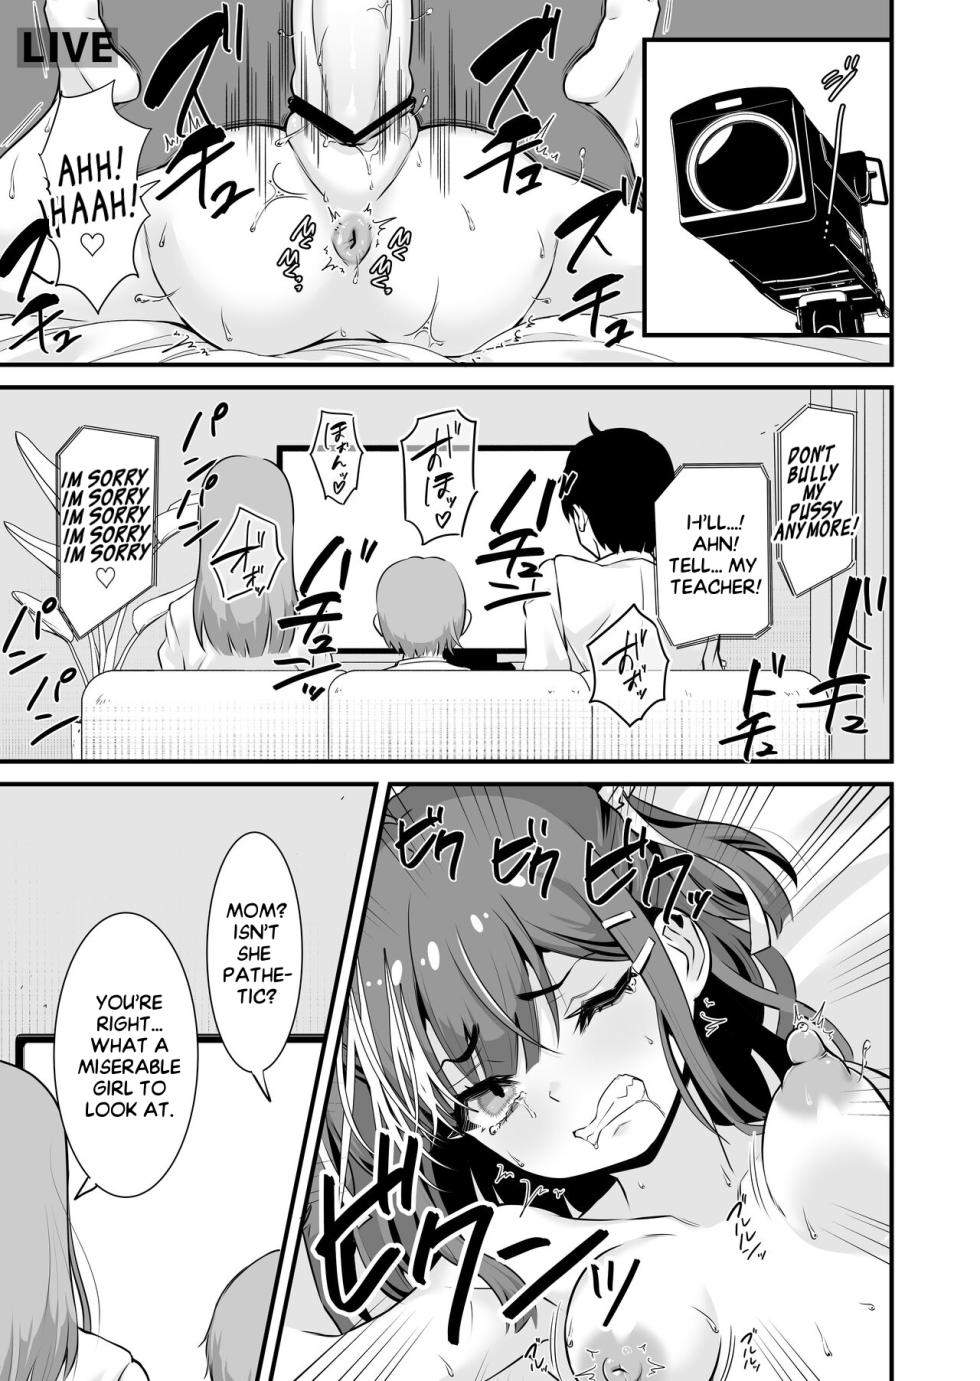 [Whisp (Touou)] Speedrunning A Brat's Correction [CLOUTJOHNSONSCANS] [ENG] - Page 14